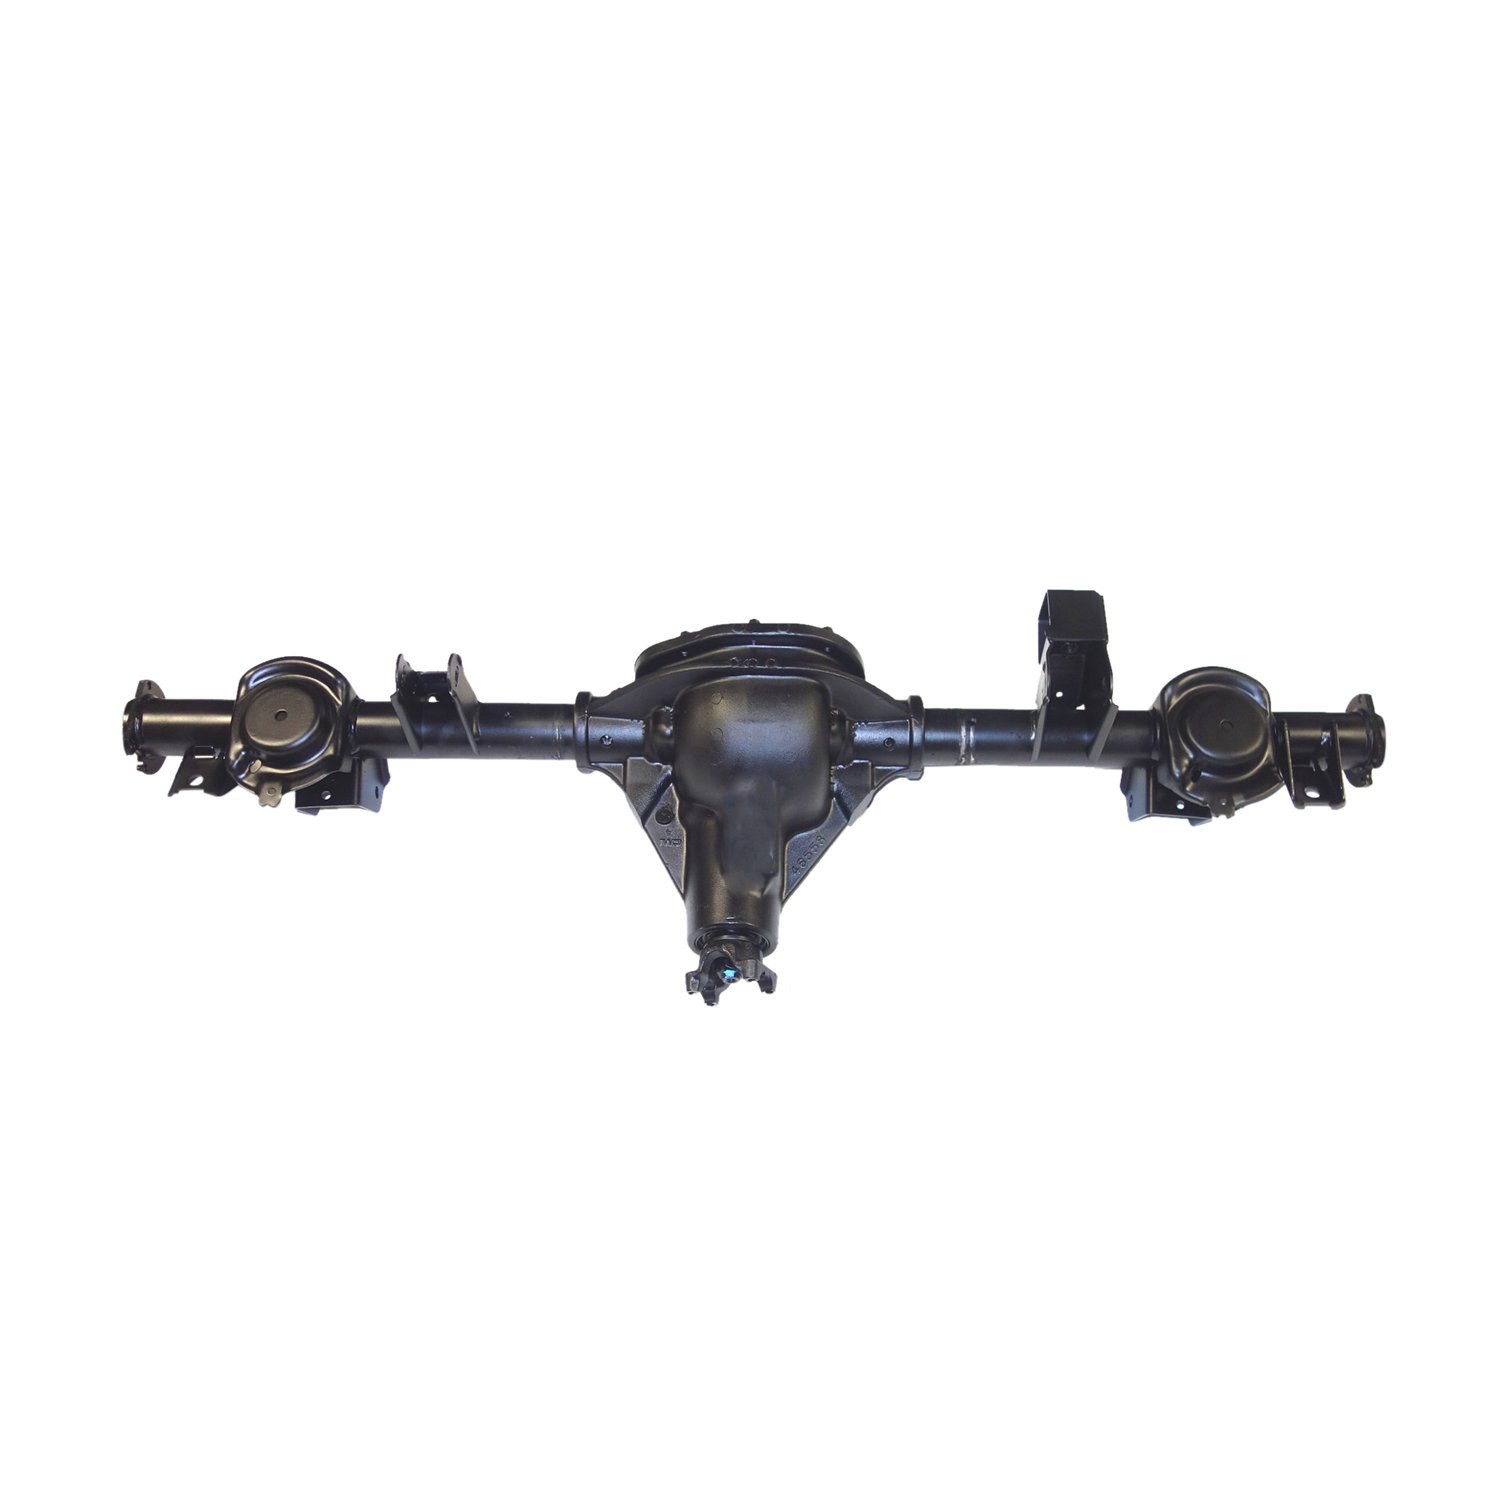 Remanufactured Complete Axle Assembly for Dana 44 96-98